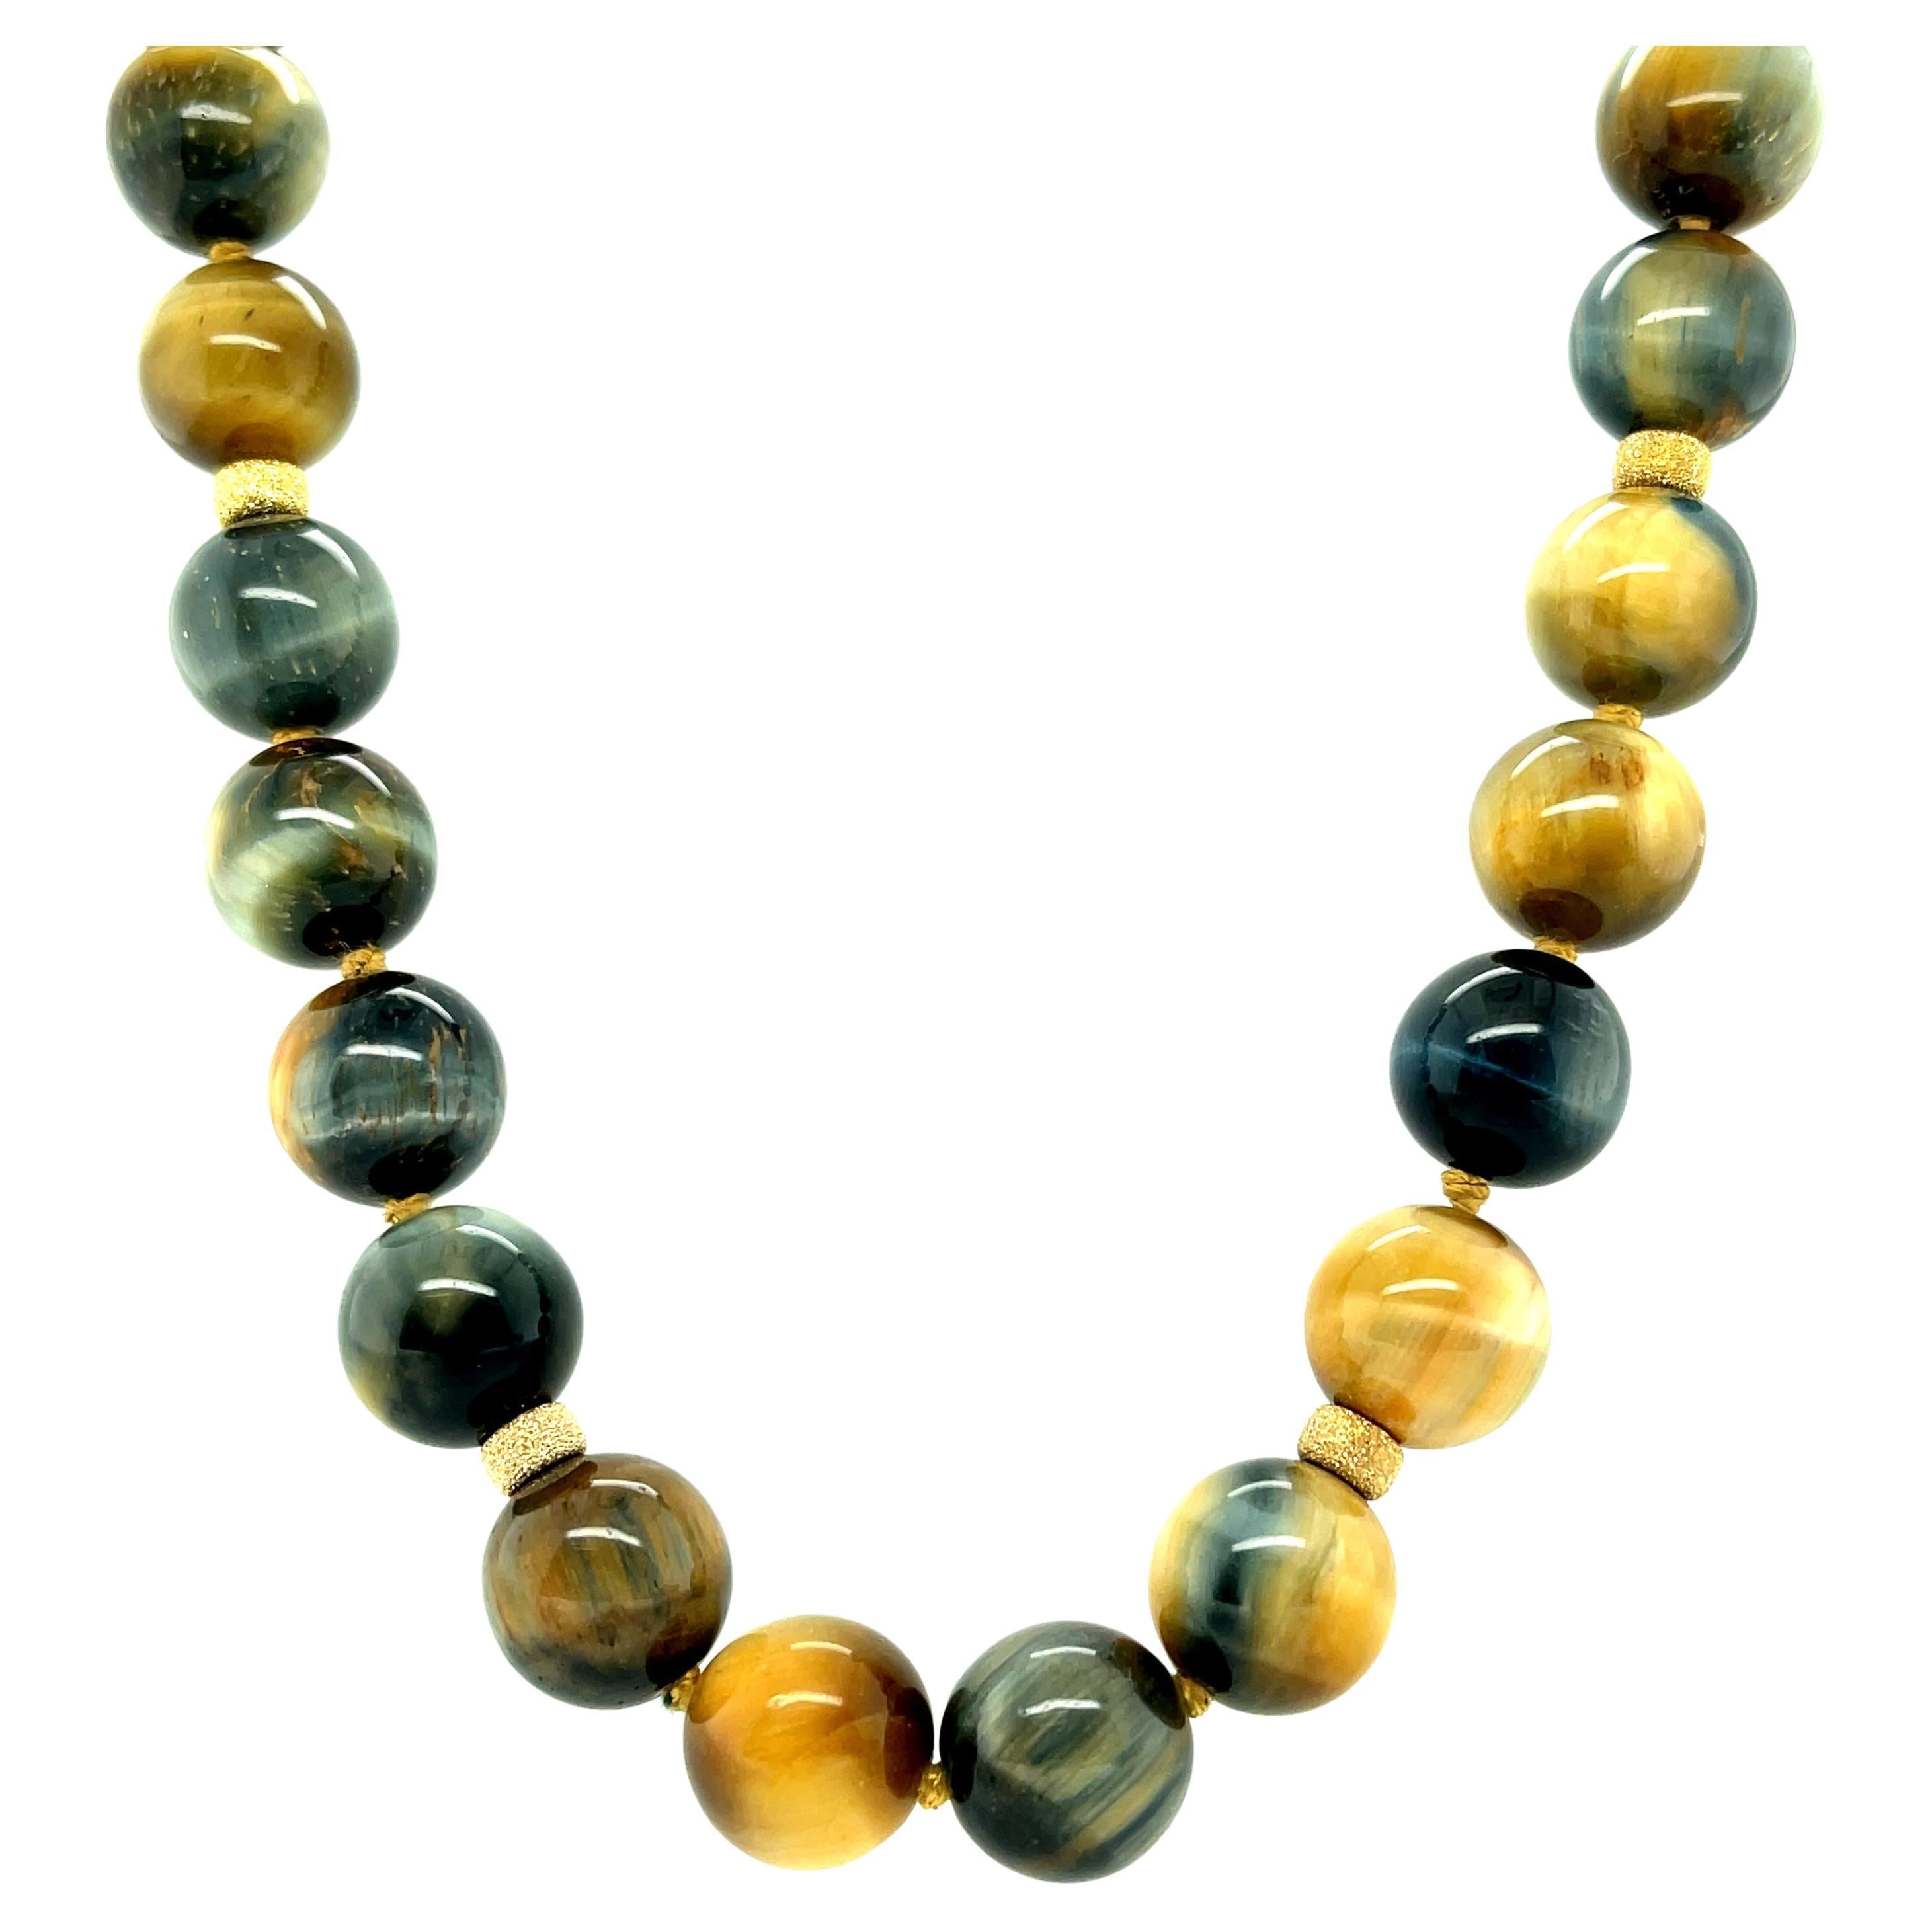 Round Falcon, Cat's Eye Quartz Necklace with Yellow Gold Accents